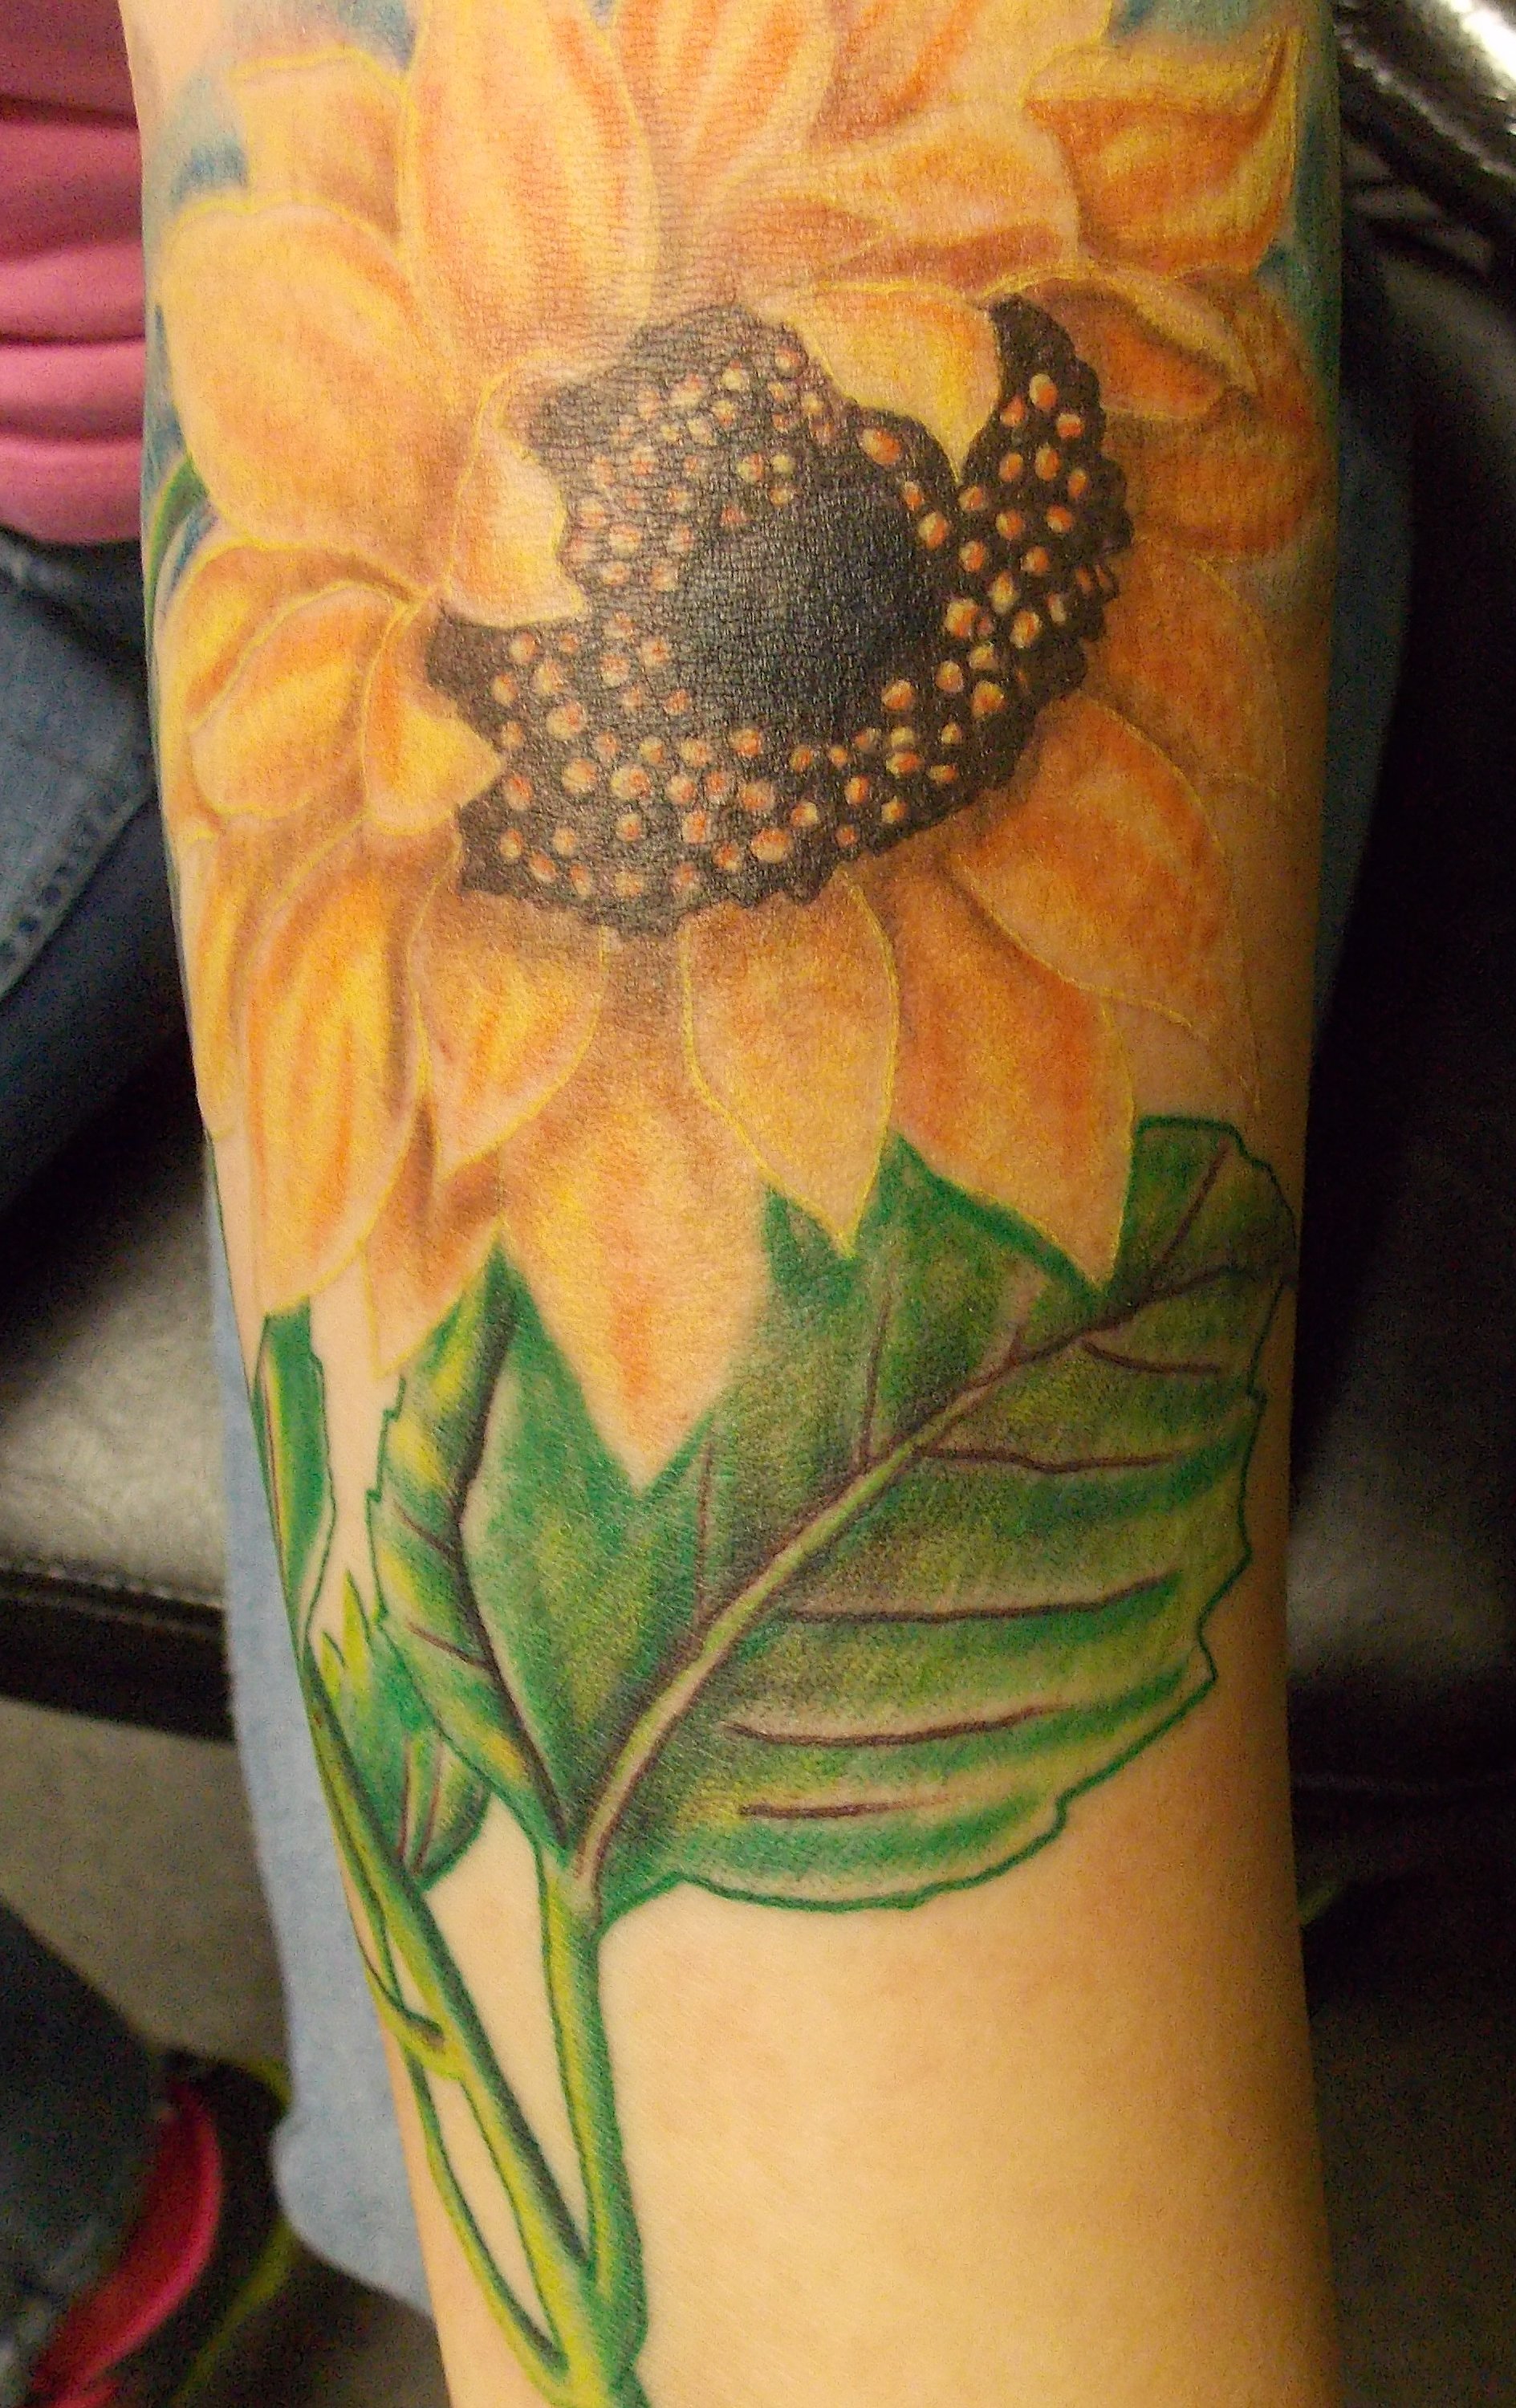 Sunflower and hummingbird for the the young lady from Pennsylvania Hope  life takes you in new and better directions And your tattoo helps light  the  By Bay City Tattoos  Facebook